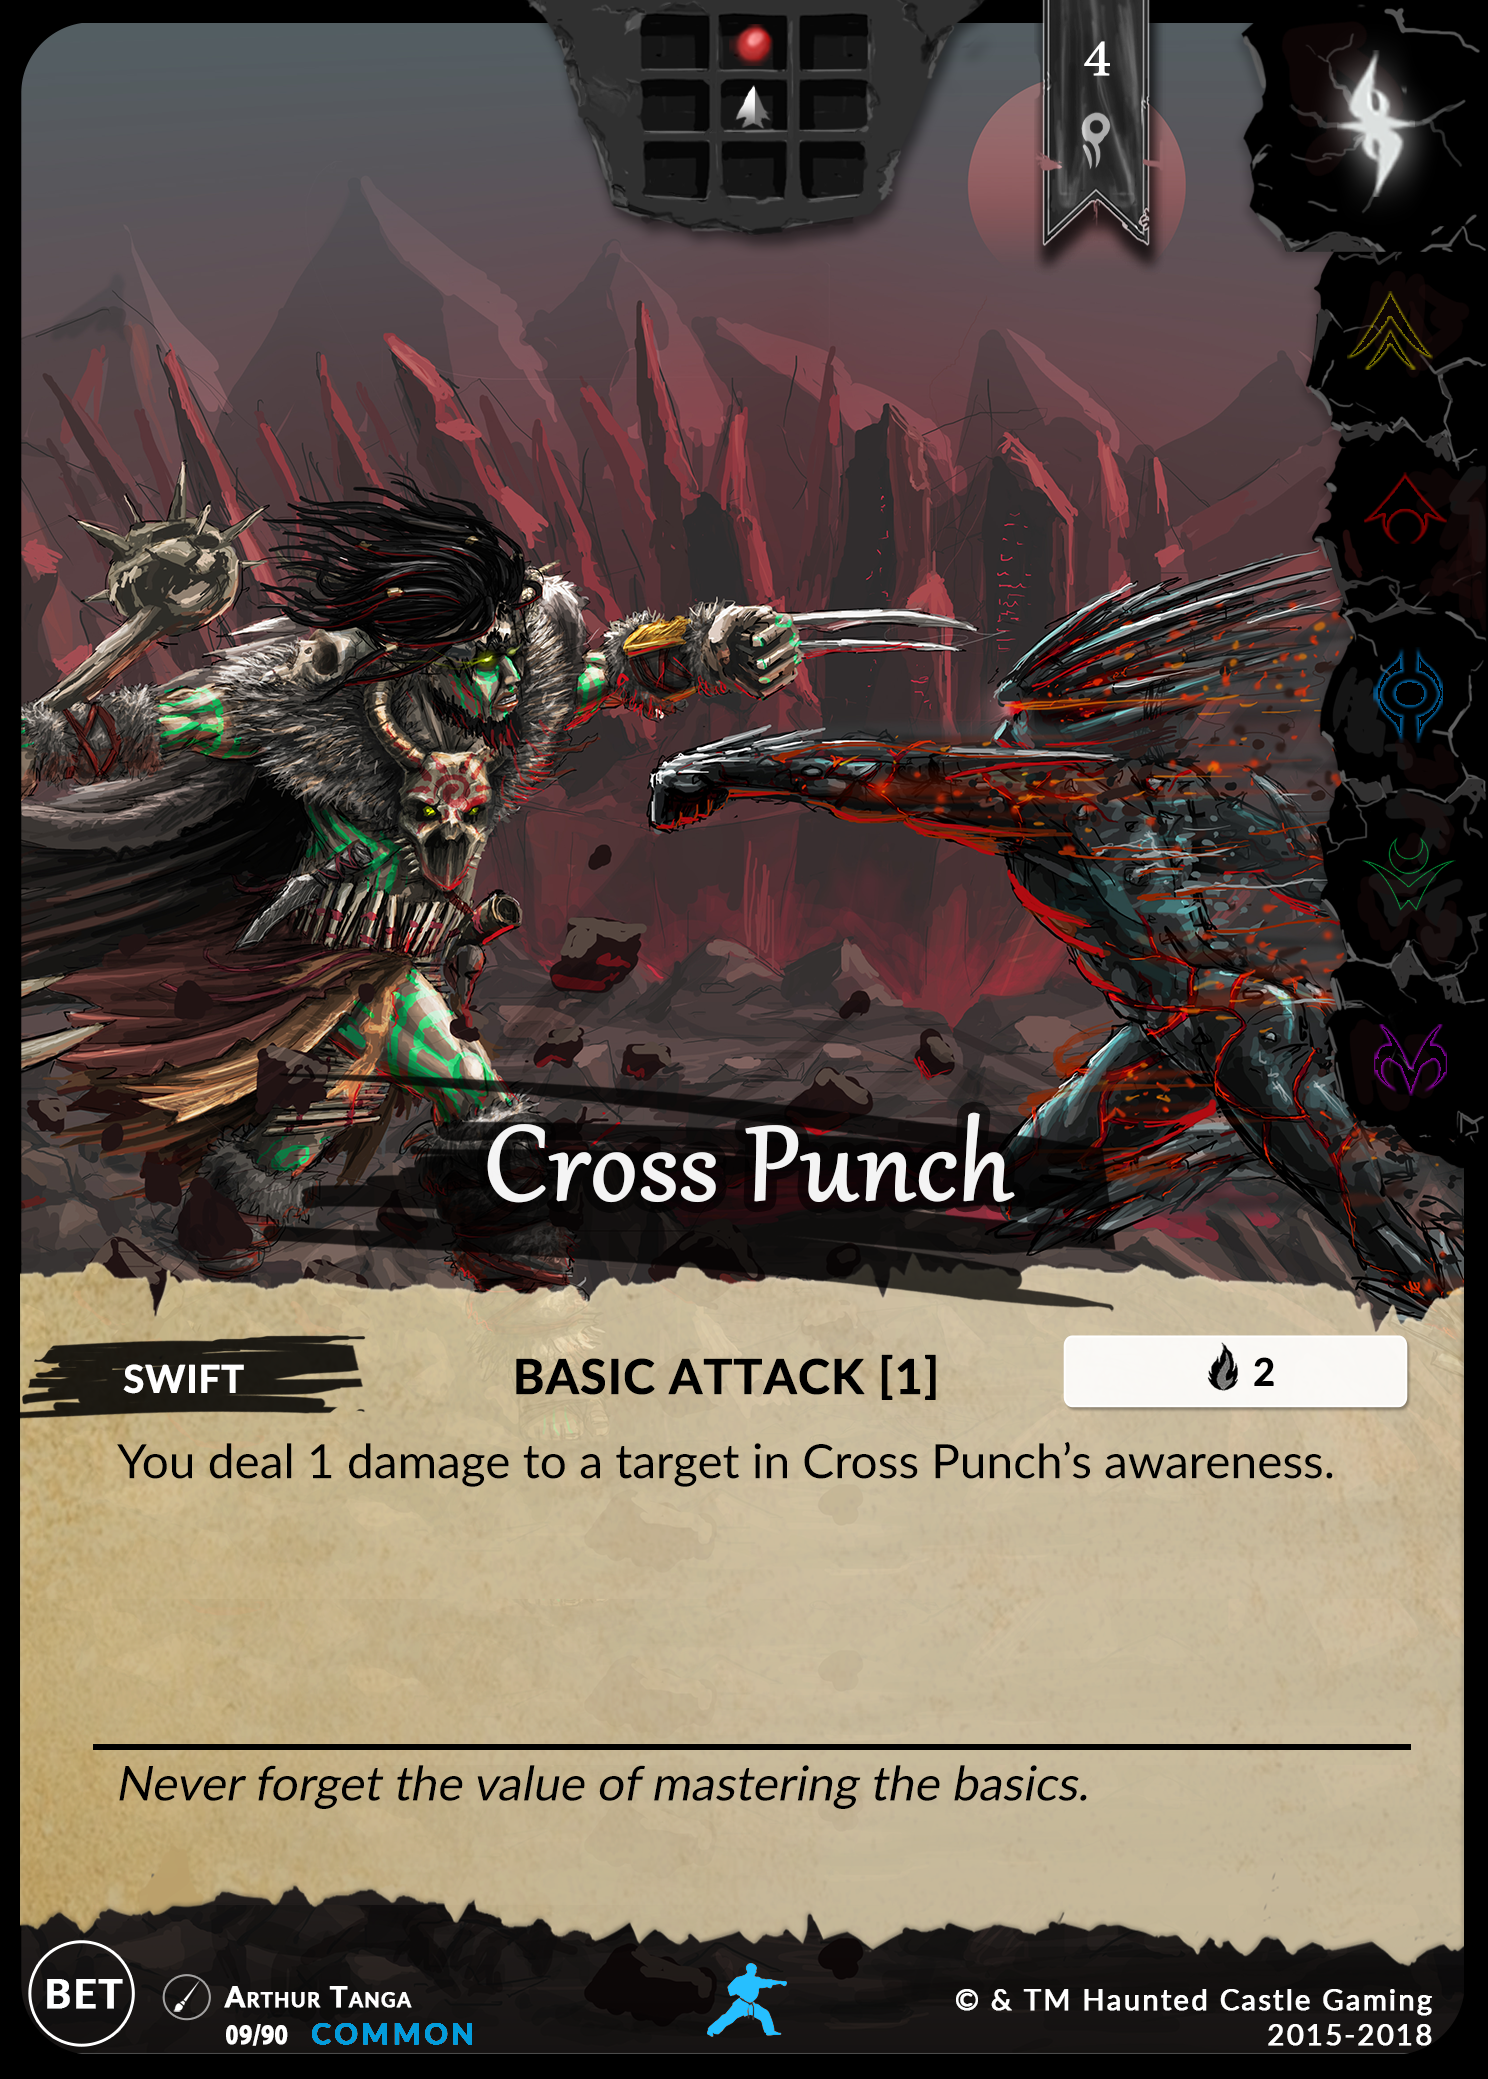 Cross Punch (Beta, 9/90) | North of Exile Games